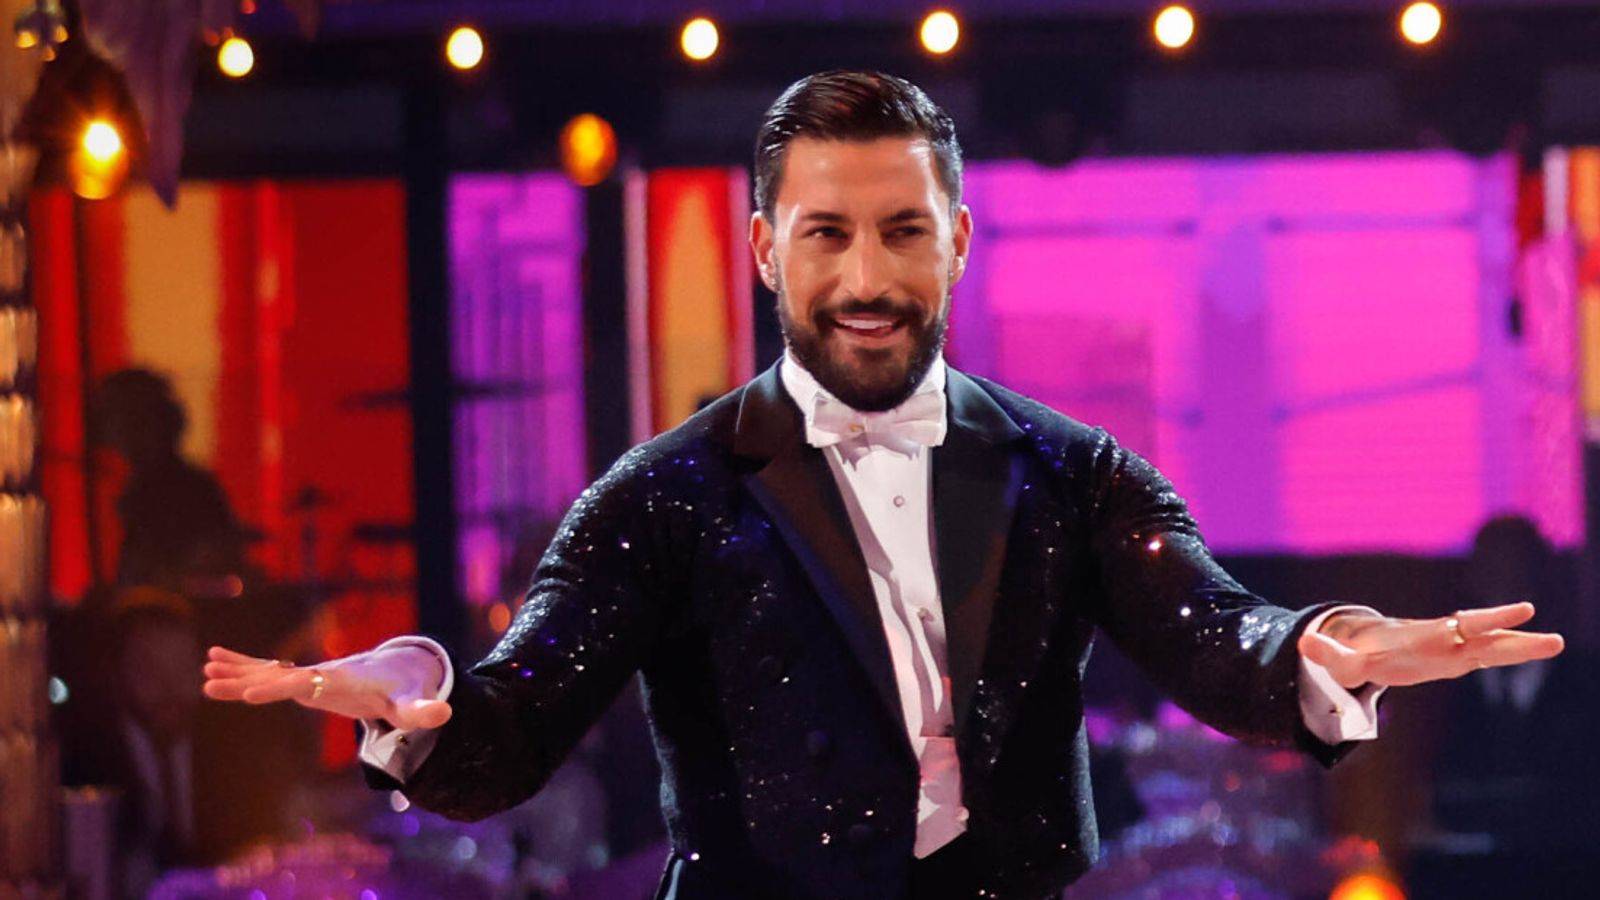 Strictly Come Dancing star Giovanni Pernice denies claims of 'abusive or threatening behaviour' on show